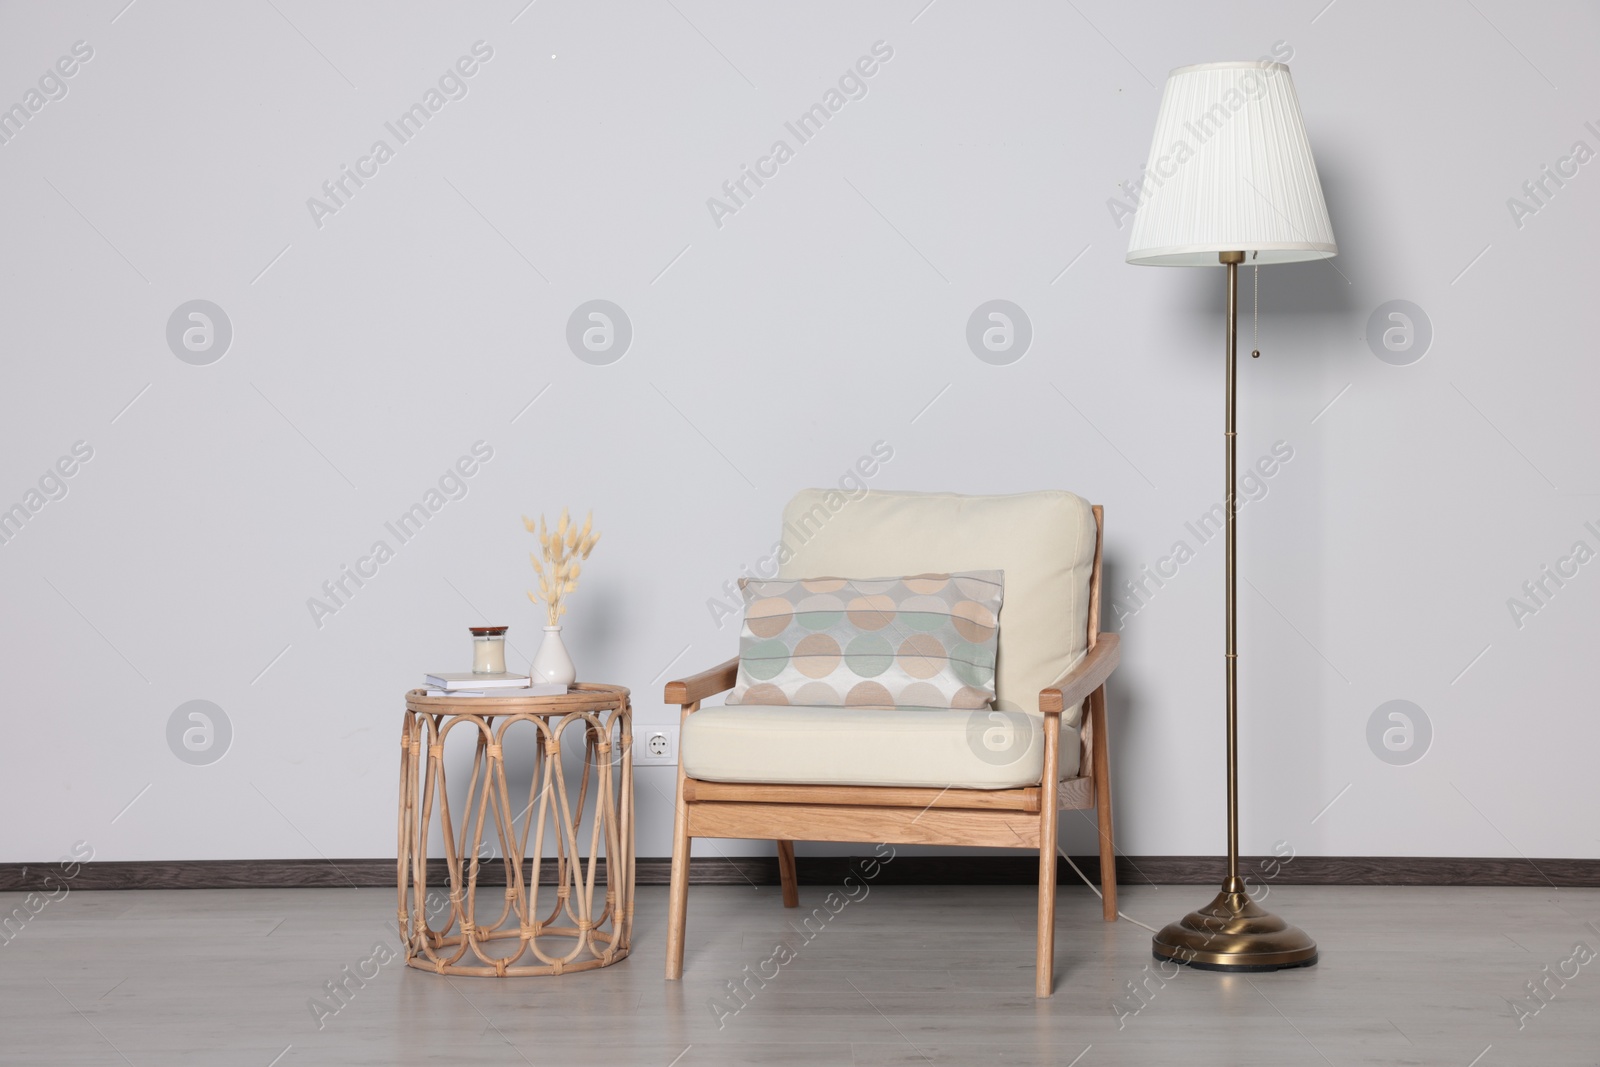 Photo of Stylish armchair, floor lamp and table near white wall. Interior design